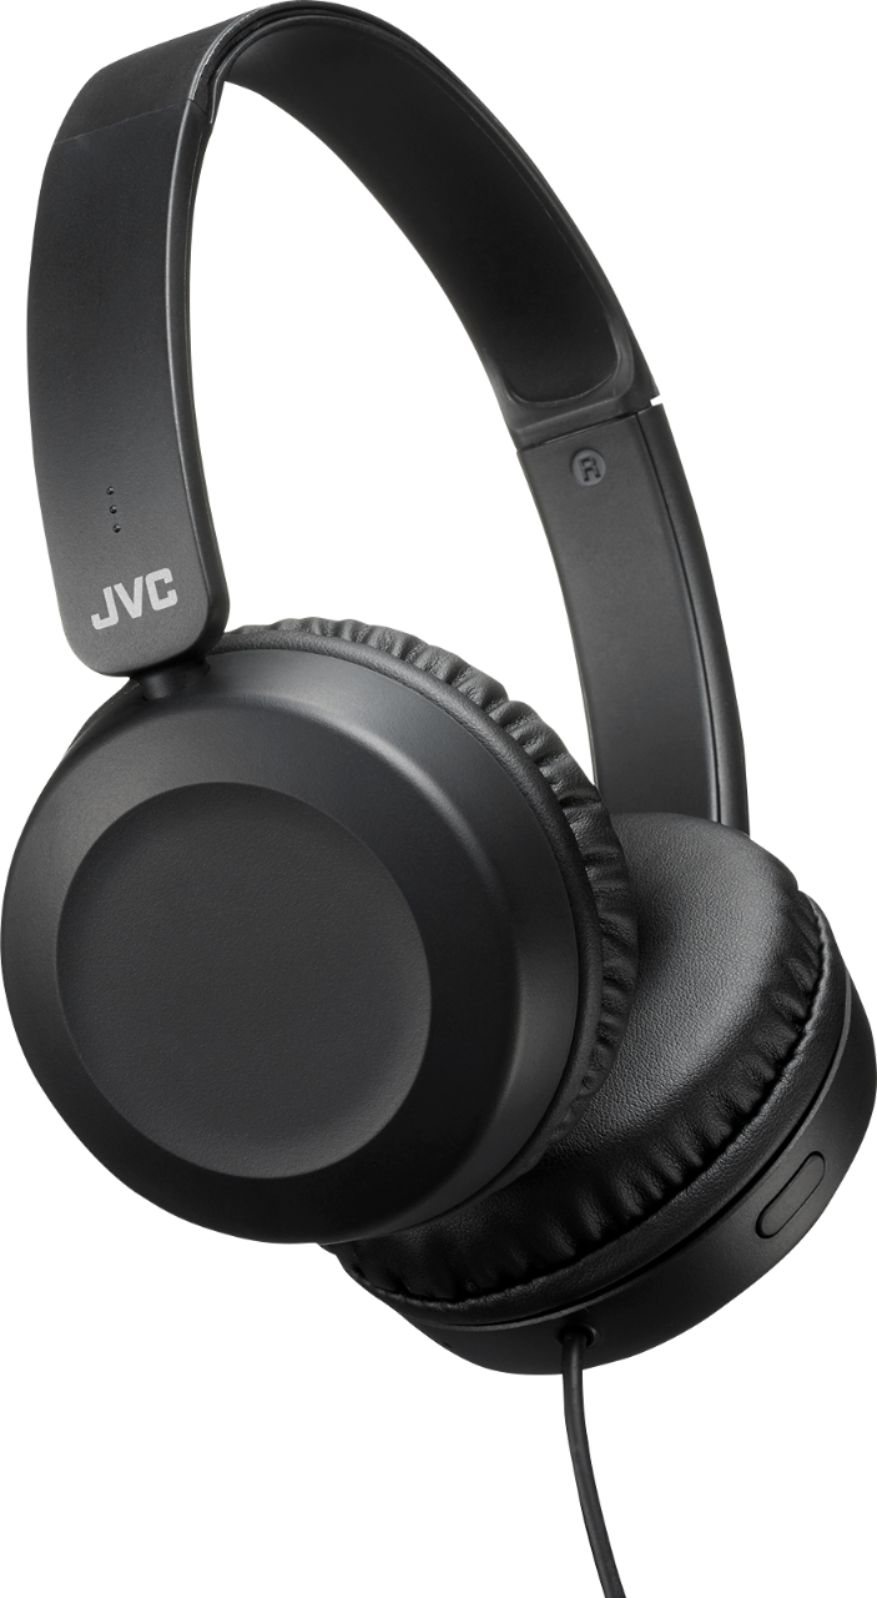 Questions and Answers: JVC Powerful Sound On Ear Headphones Black ...